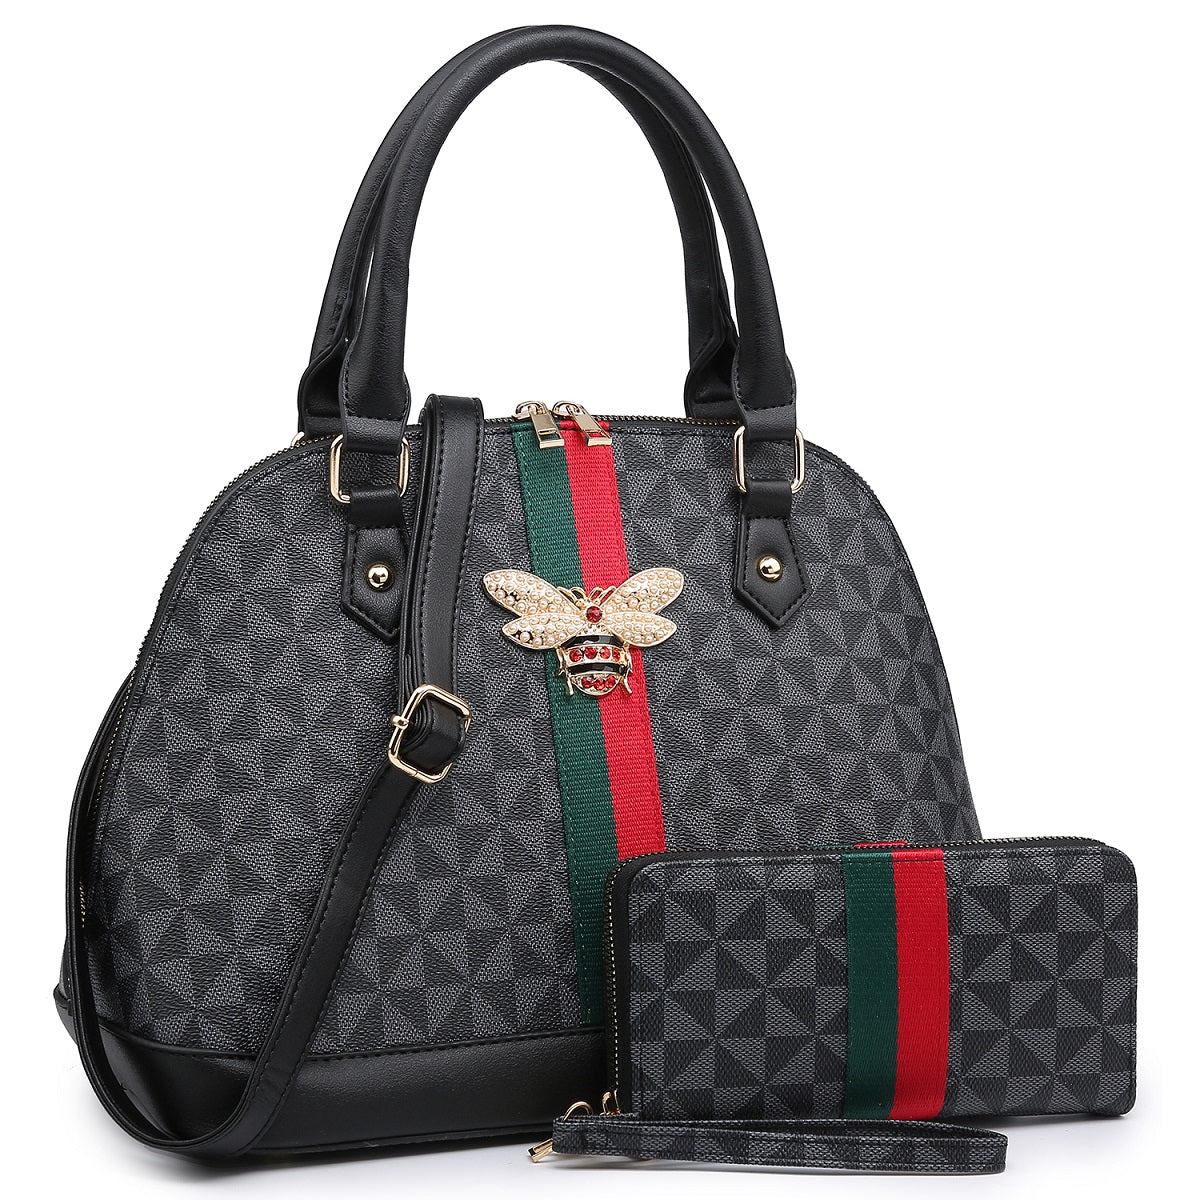 Mini bag with Interlocking G in GG supreme and brown leather | GUCCI® US